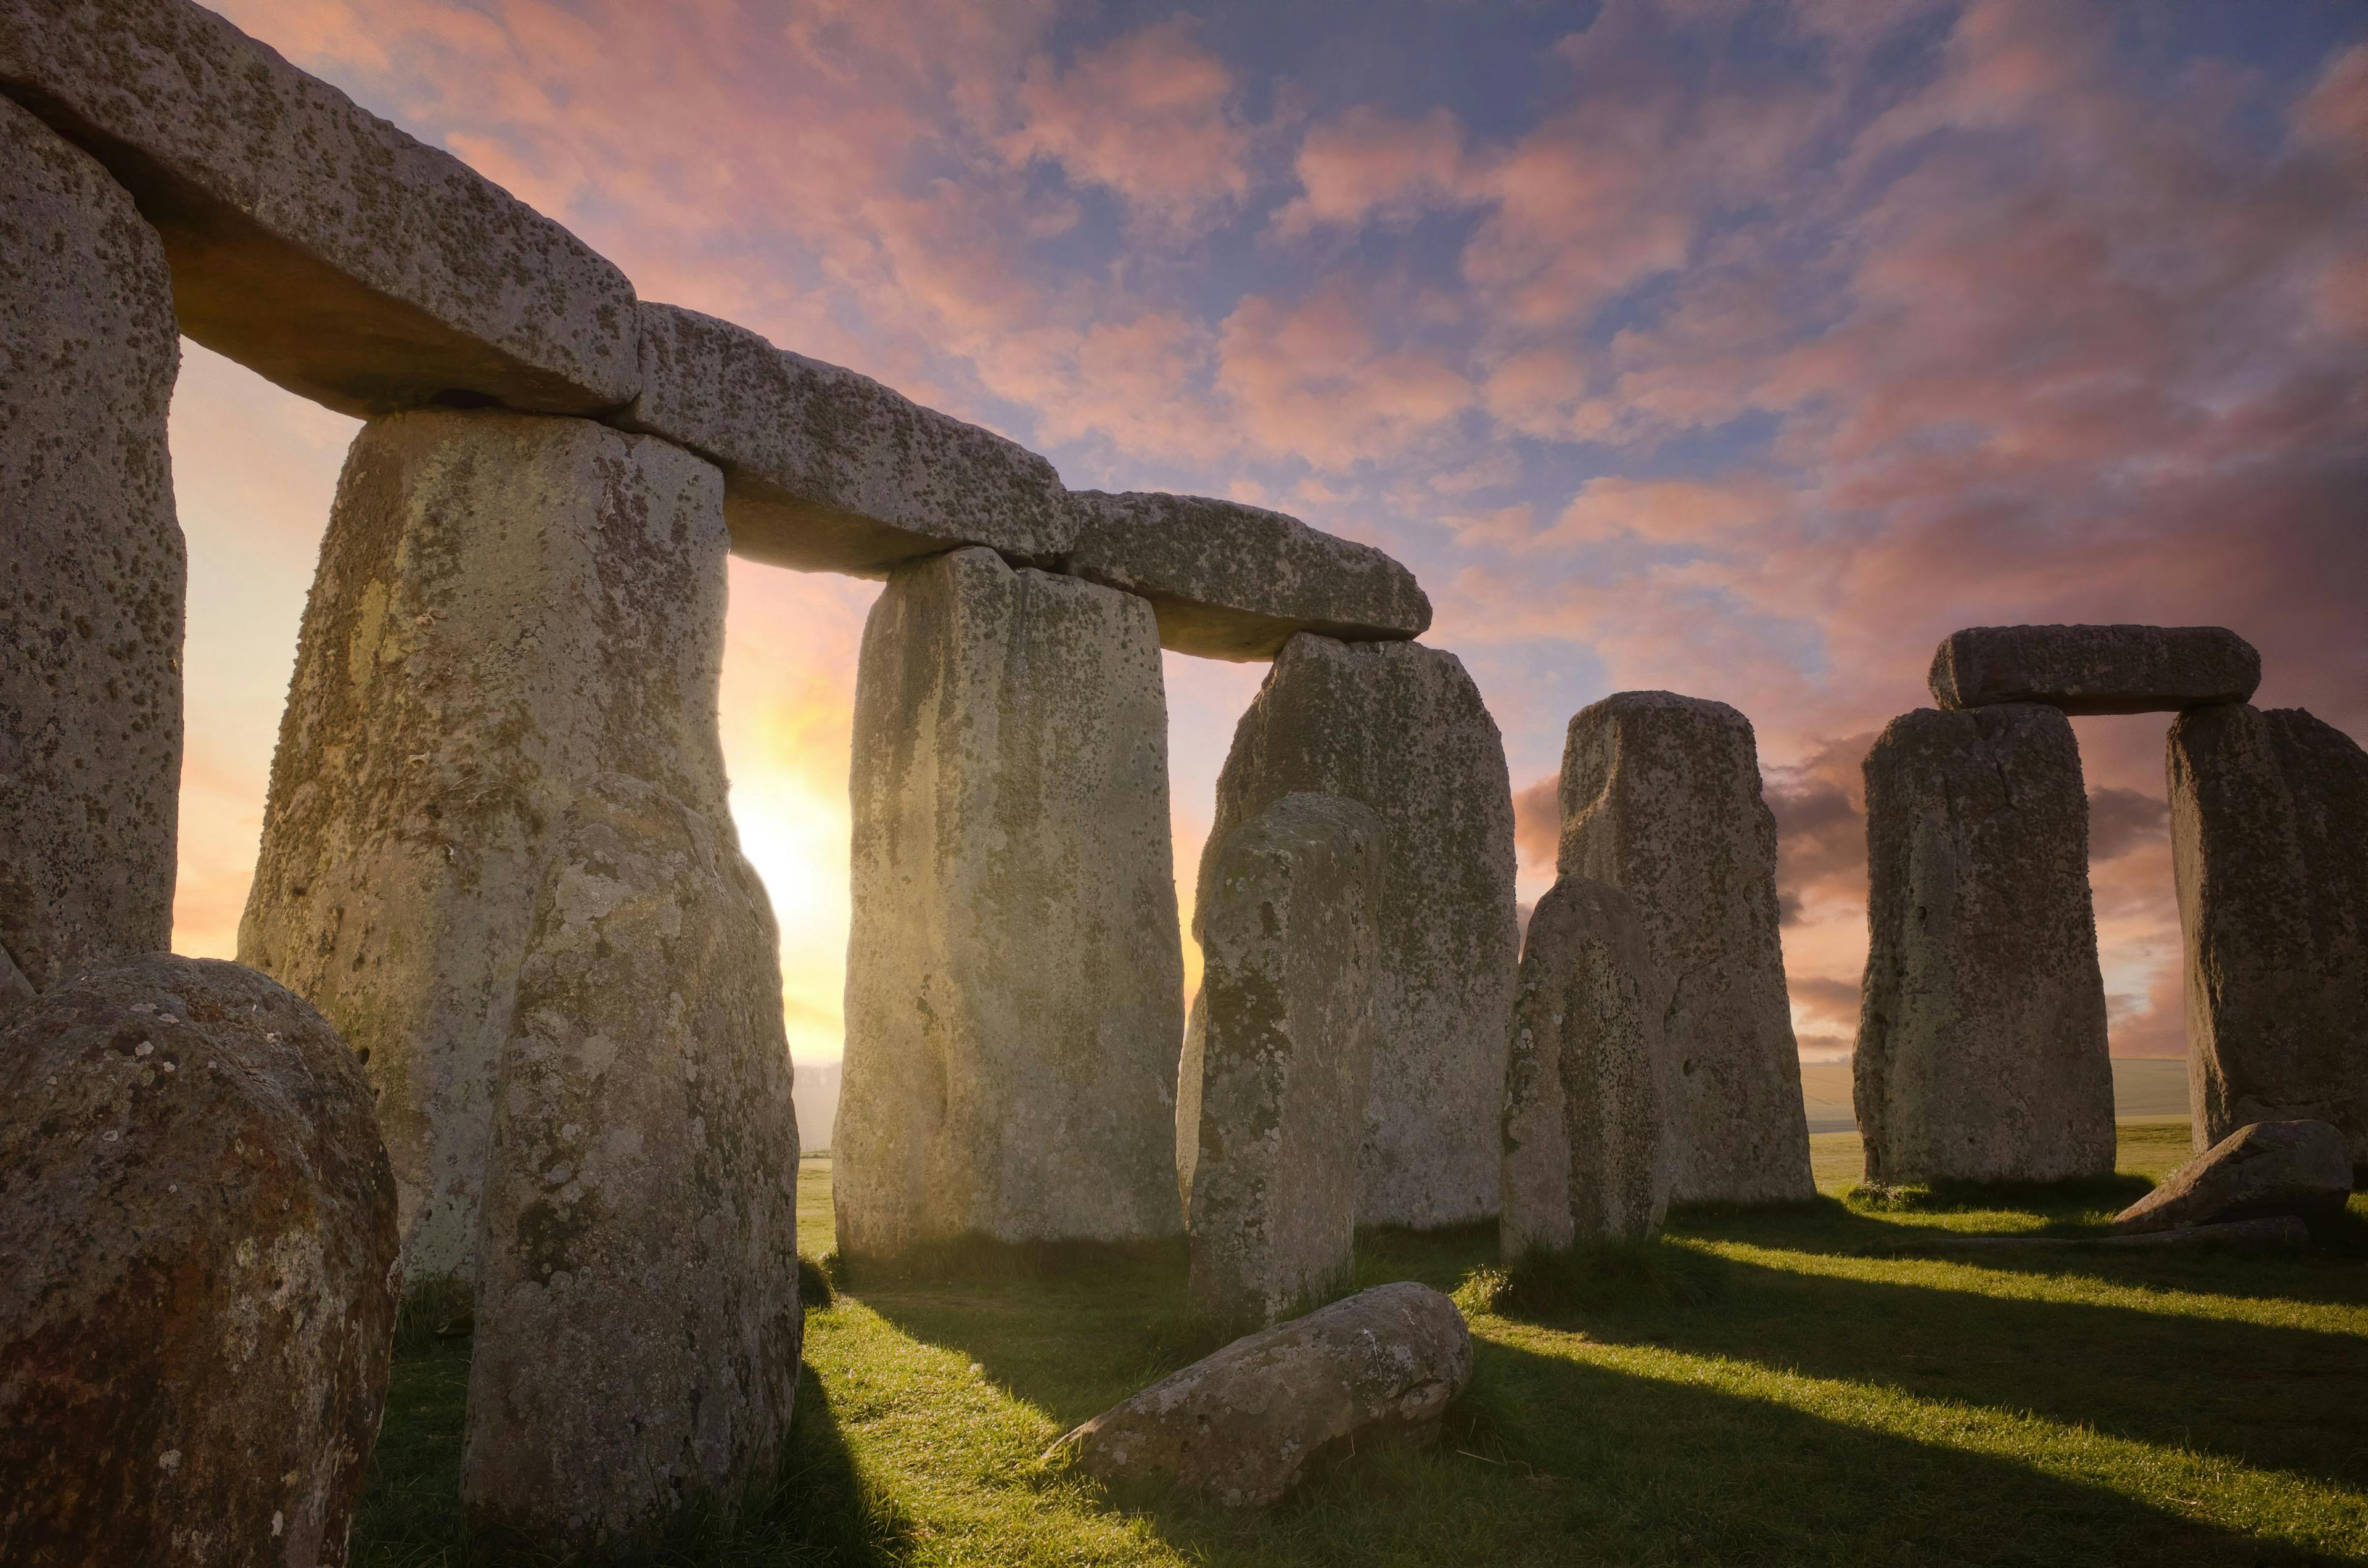 Inside the Stonehenge Circle of Stones with a Sun Rays Filtering Through the Arches Dramatic Sky Sunrise behind it | Image Credit: © PTZ Pictures - stock.adobe.com